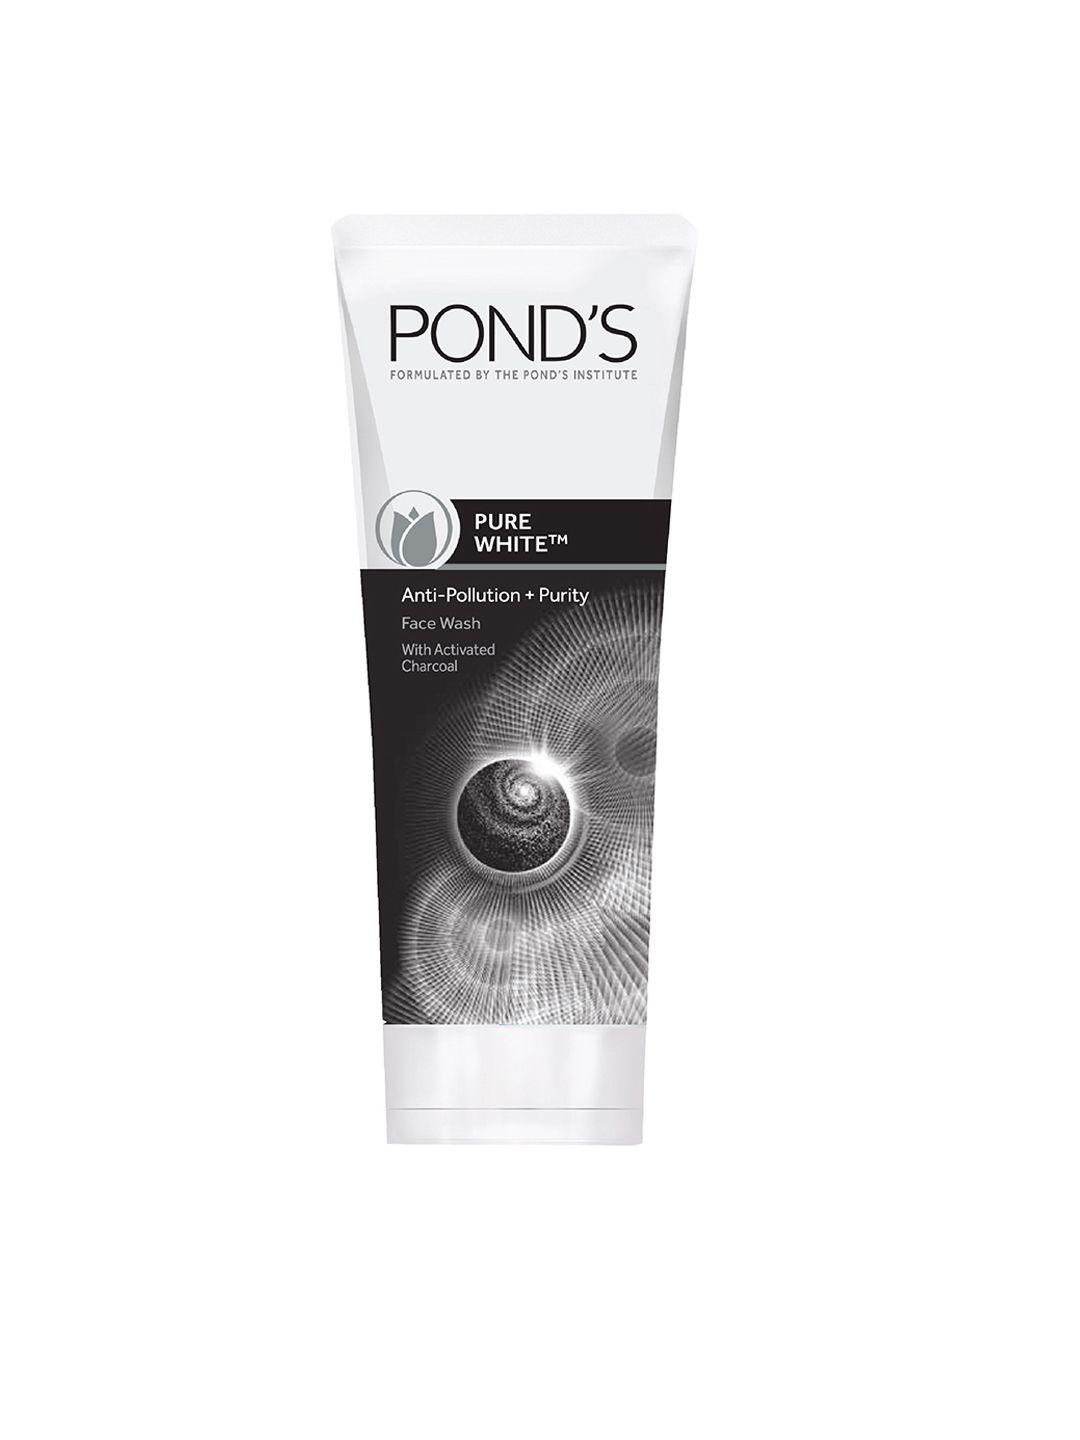 ponds-pure-detox-anti-pollution-with-activated-charcoal-purity-face-wash---15-g